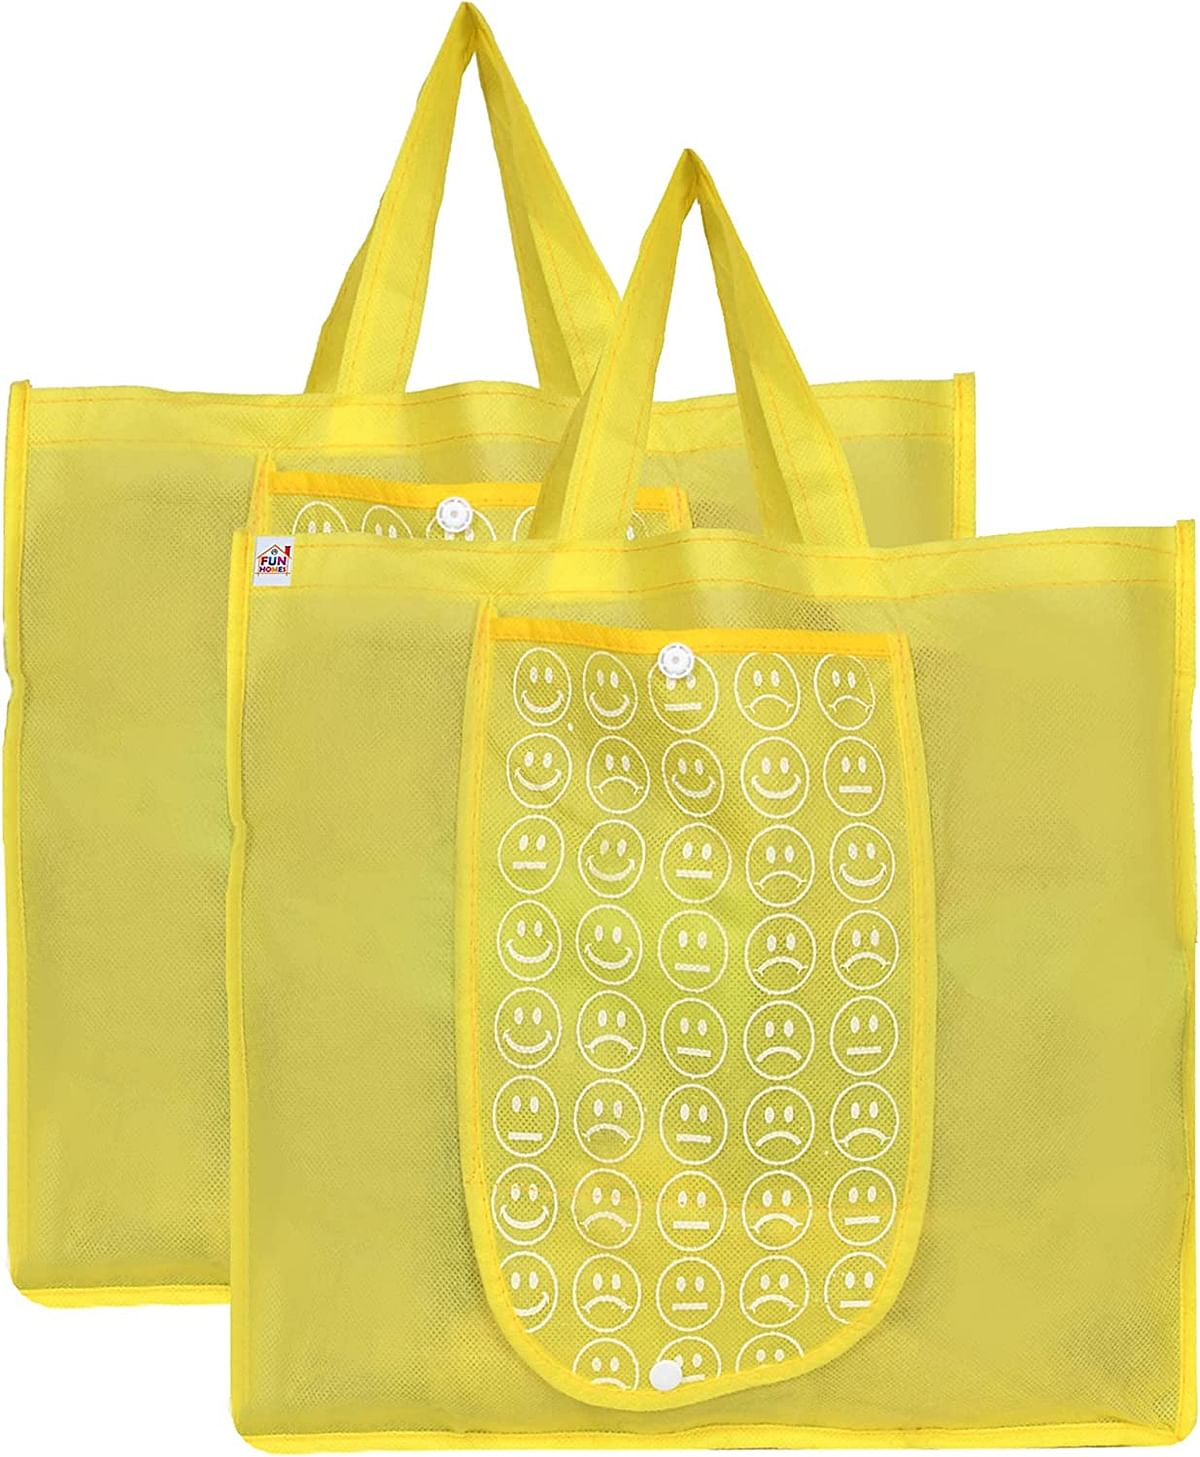 Fun Homes Shopping Grocery Bags Foldable, Washable Grocery Tote Bag With One Small Pocket, Eco-Friendly Purse Bag Fits In Pocket Waterproof & Lightweight (Set Of 2,Yellow)